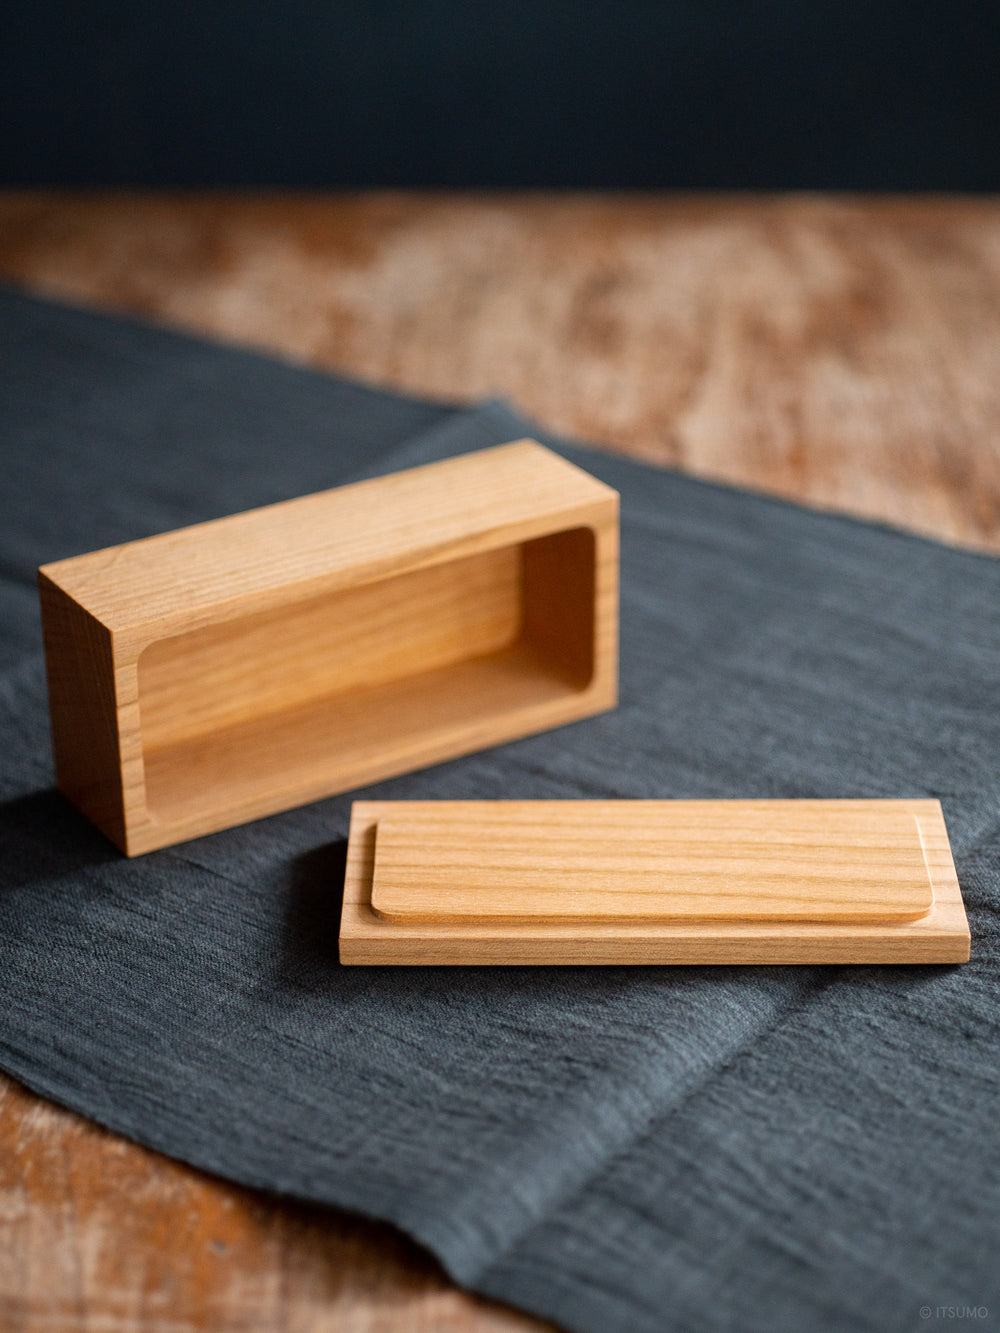 Azmaya cherry wood butter case with open lid